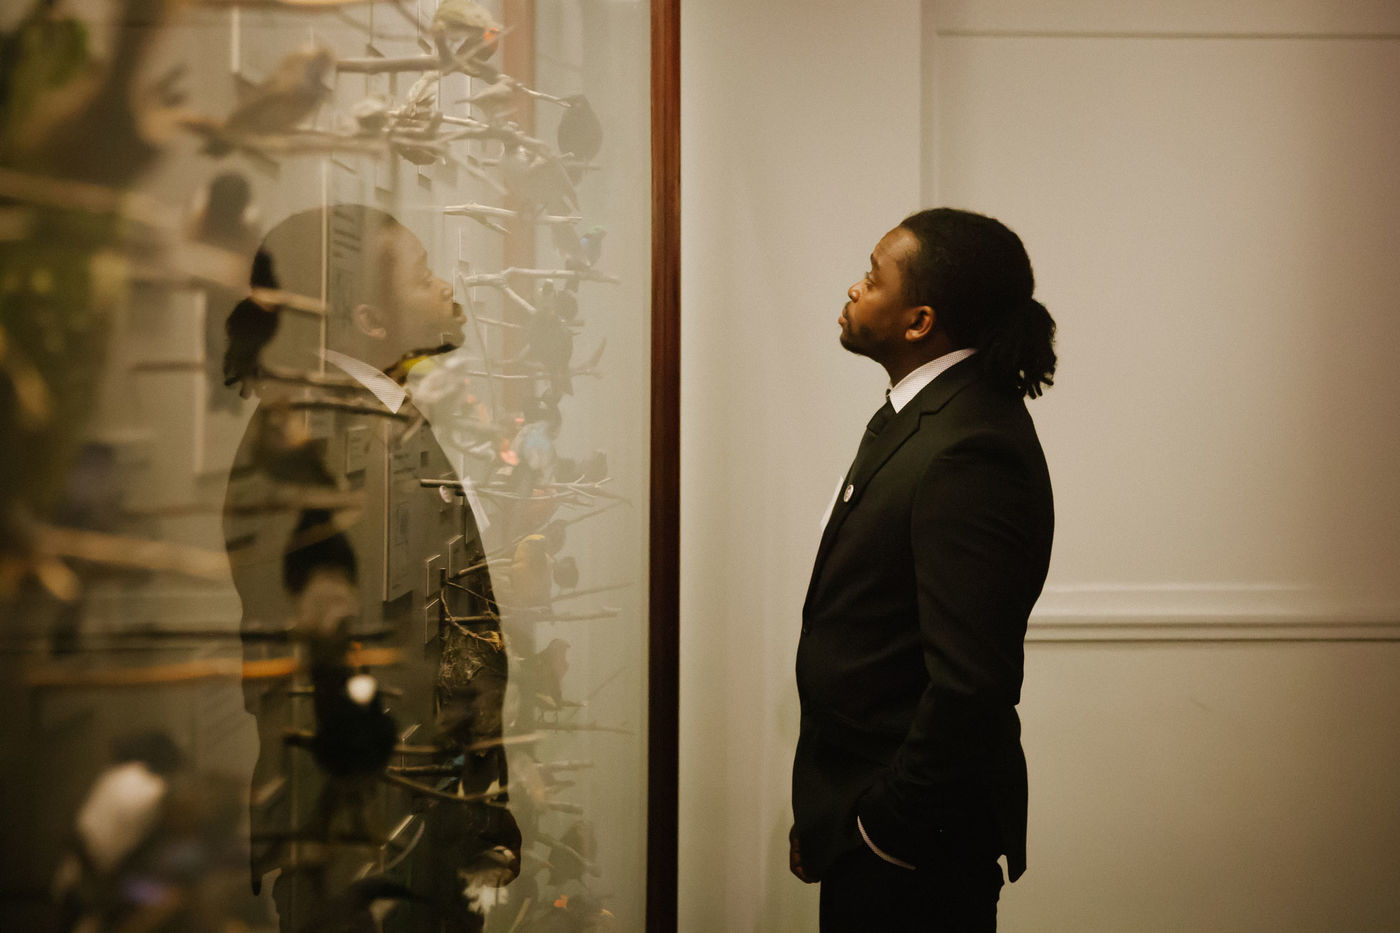 A man wearing a black suit stands looking into a exhibition display case.